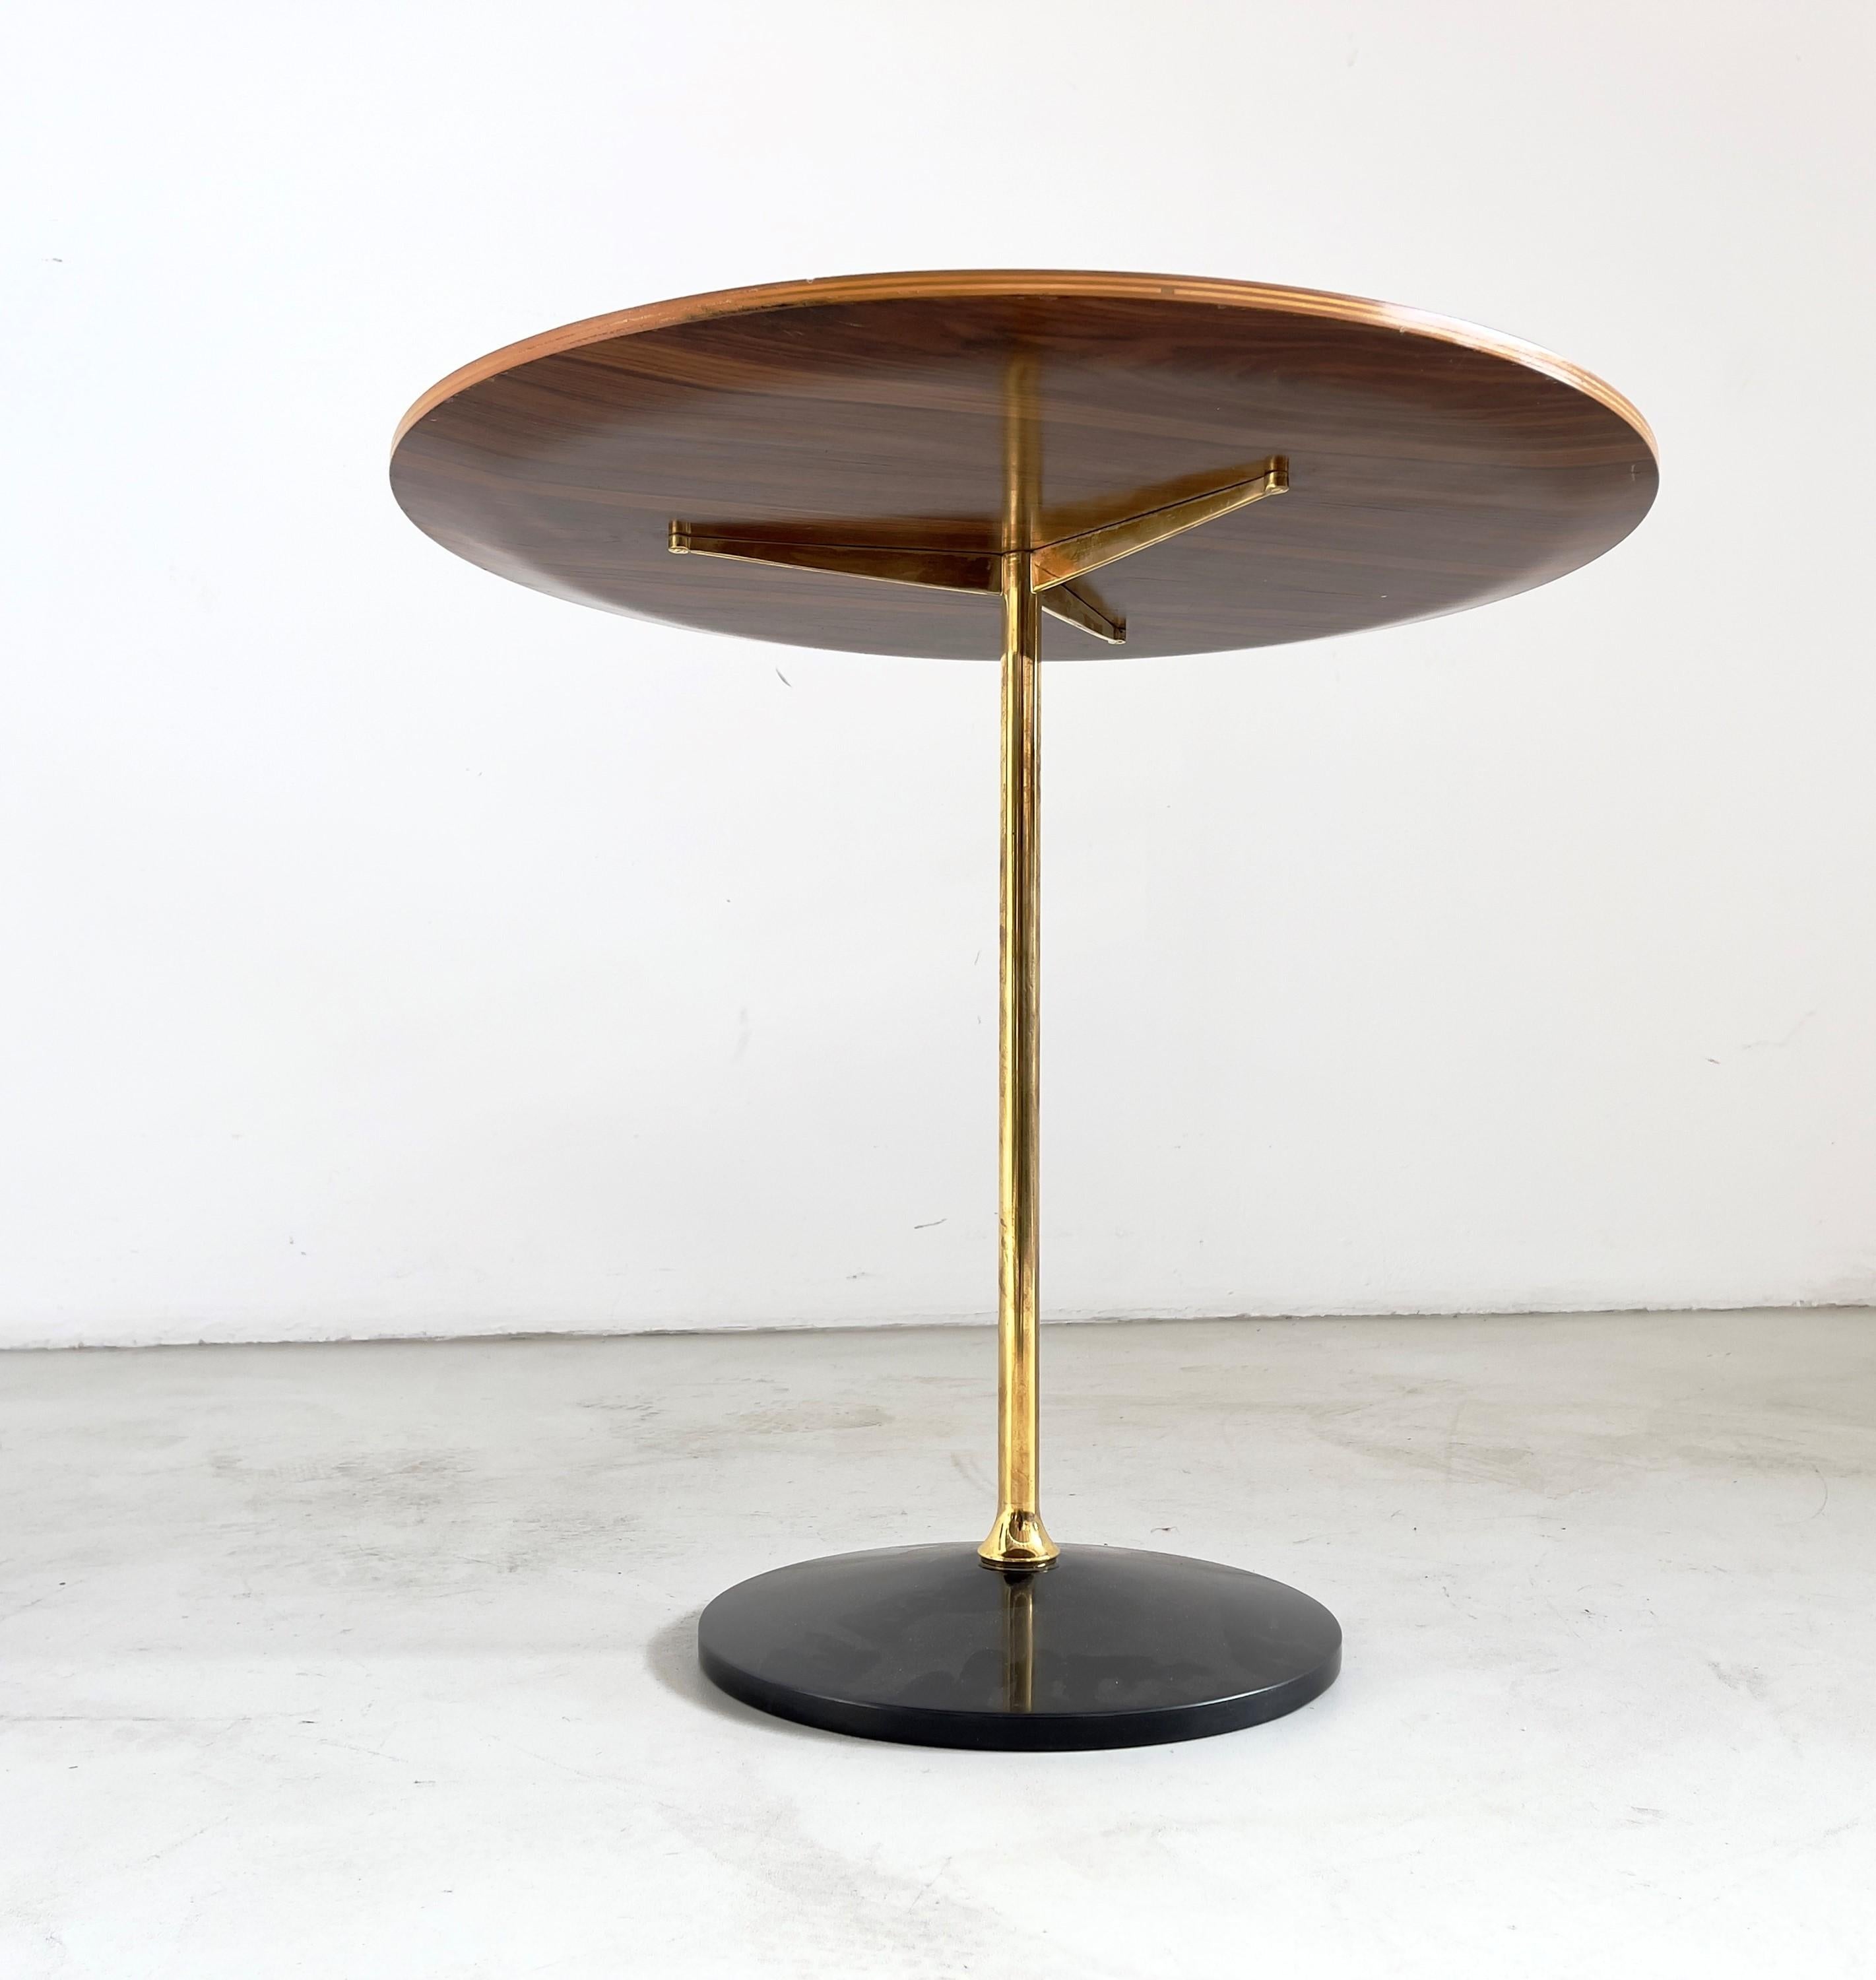 Beautiful wood and brass side table designed by Osvaldo Borsani for Tecno.
The coffee table has a round curved plywood top, brass frame reaching to a black marble base from Belgium.
Osvaldo Borsani's coffee table is suitable for furnishing important